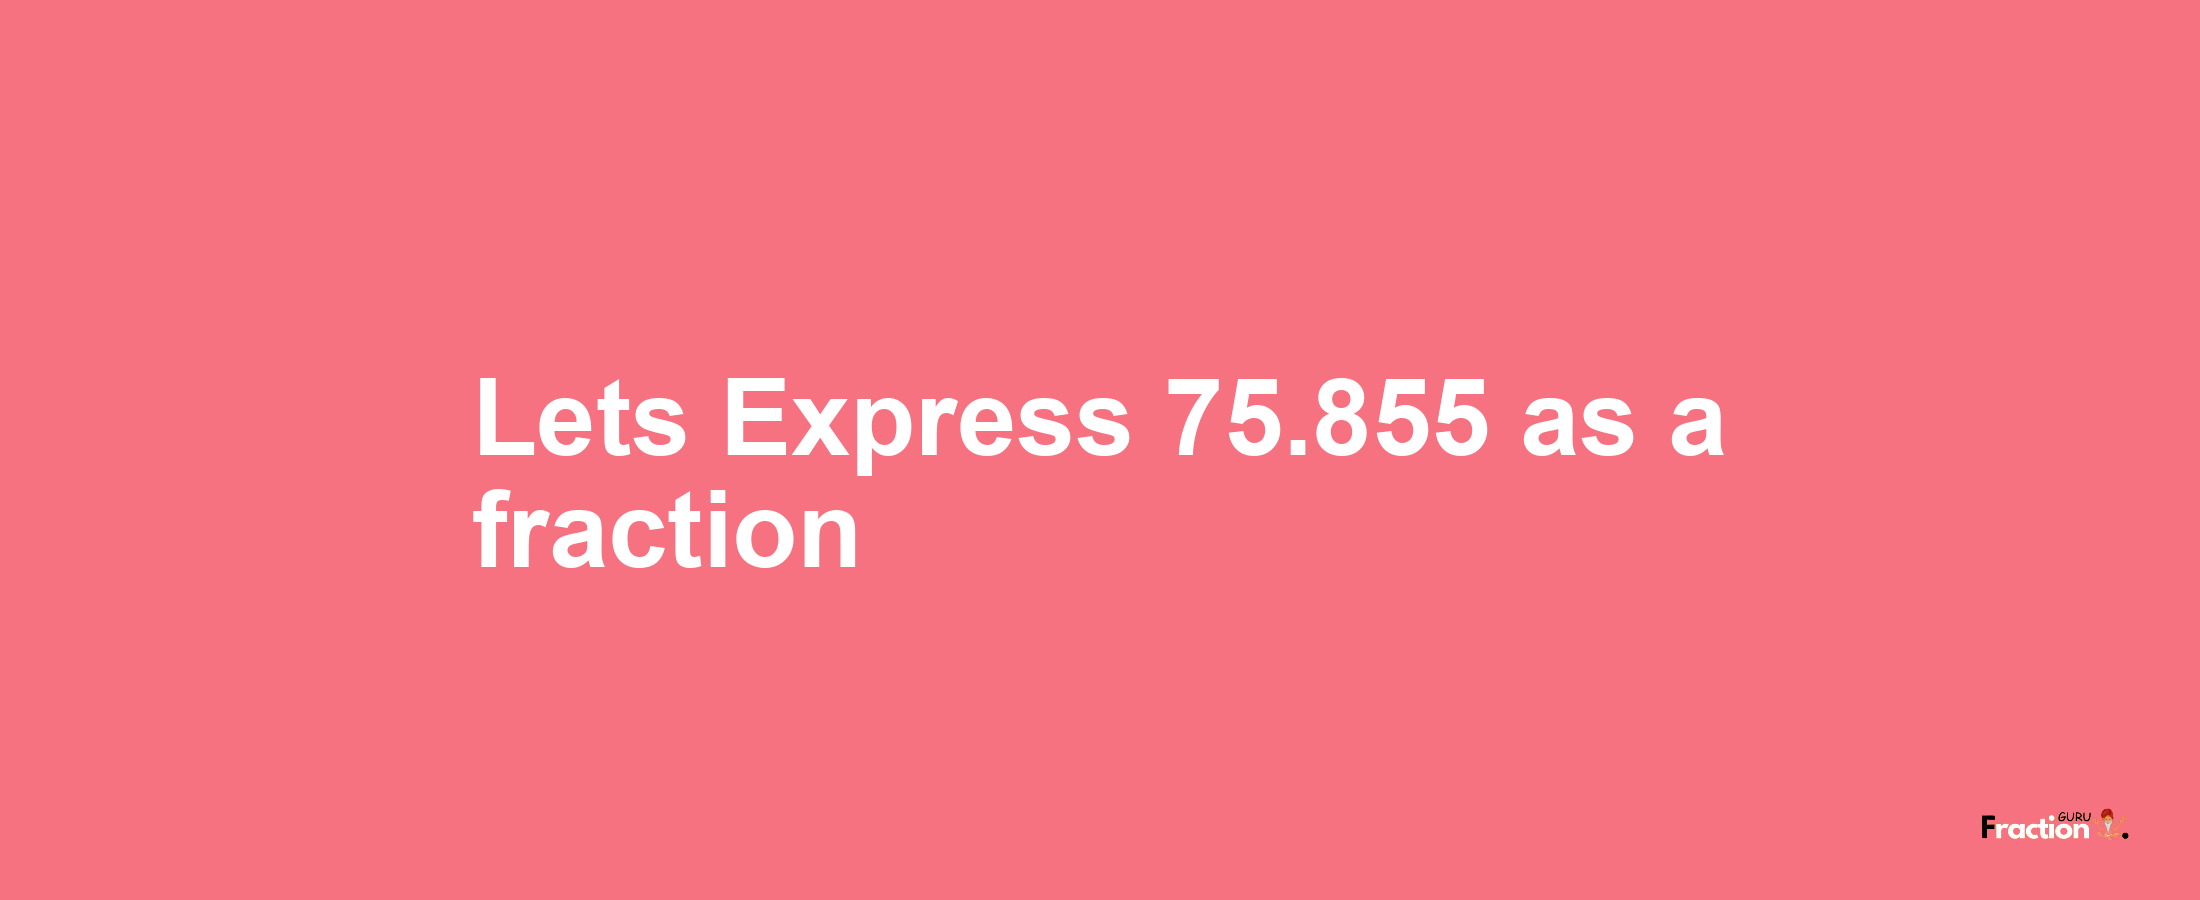 Lets Express 75.855 as afraction